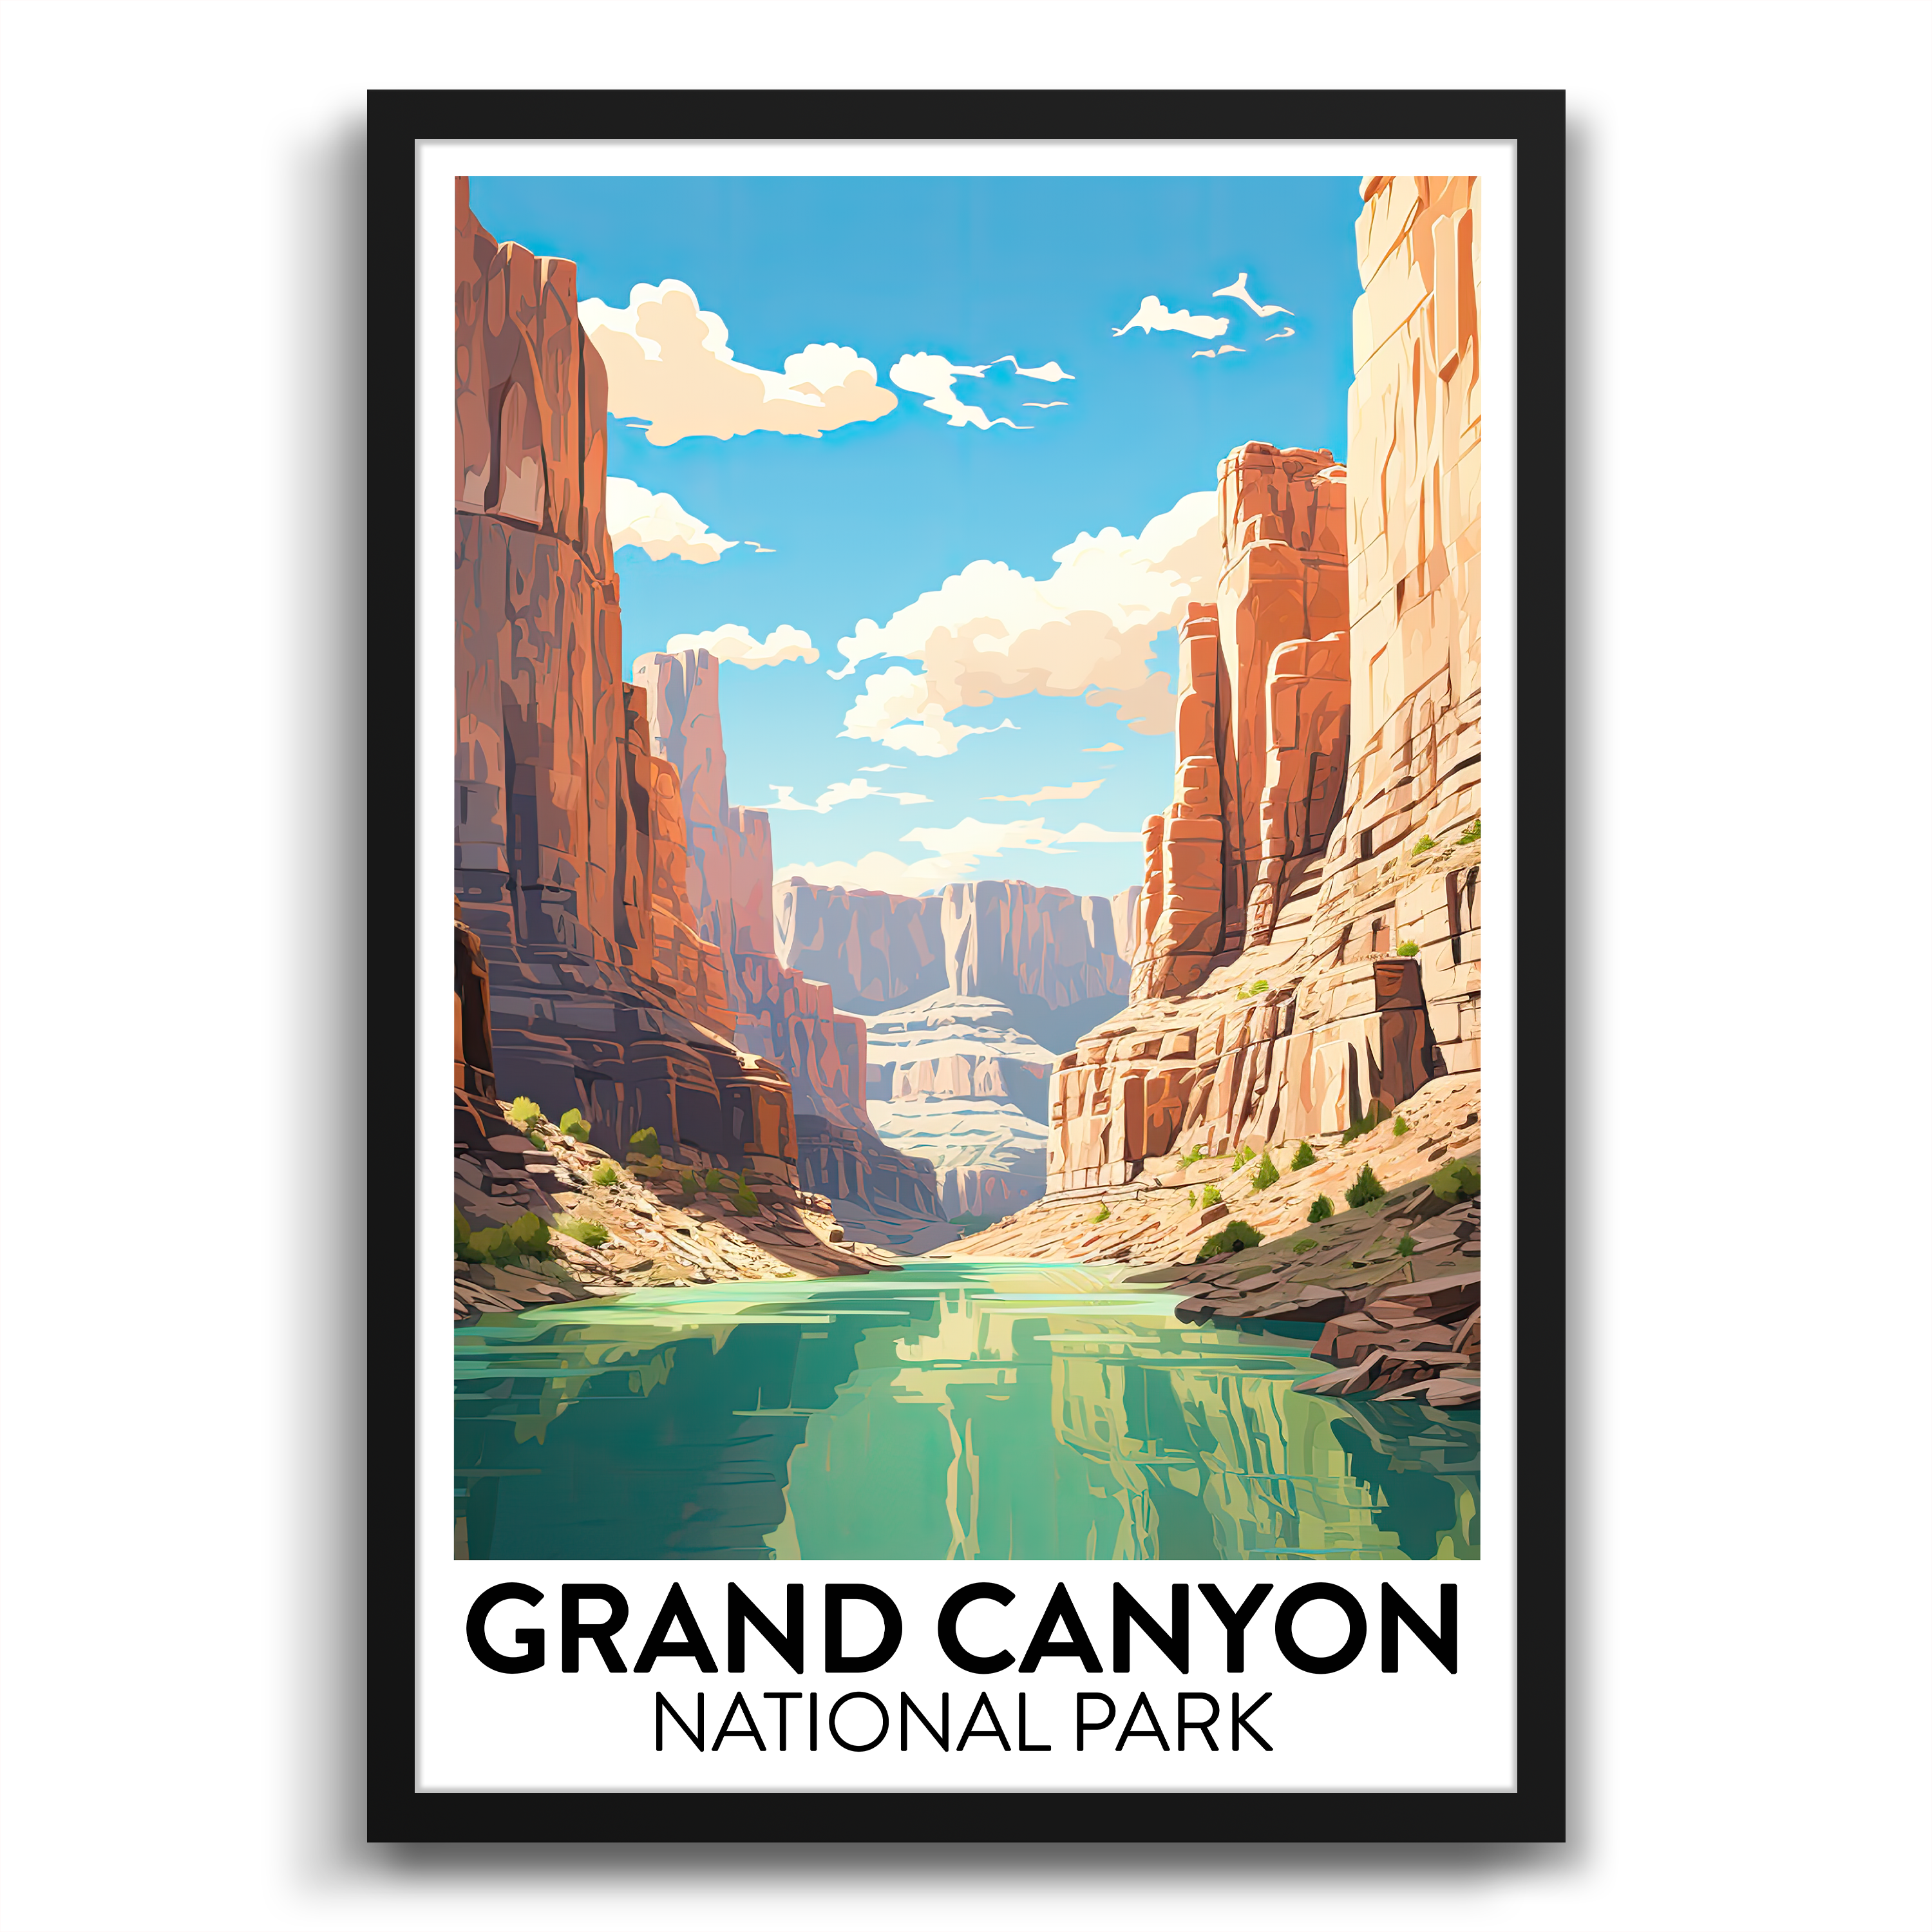 grand canyon poster showing a view through a valley